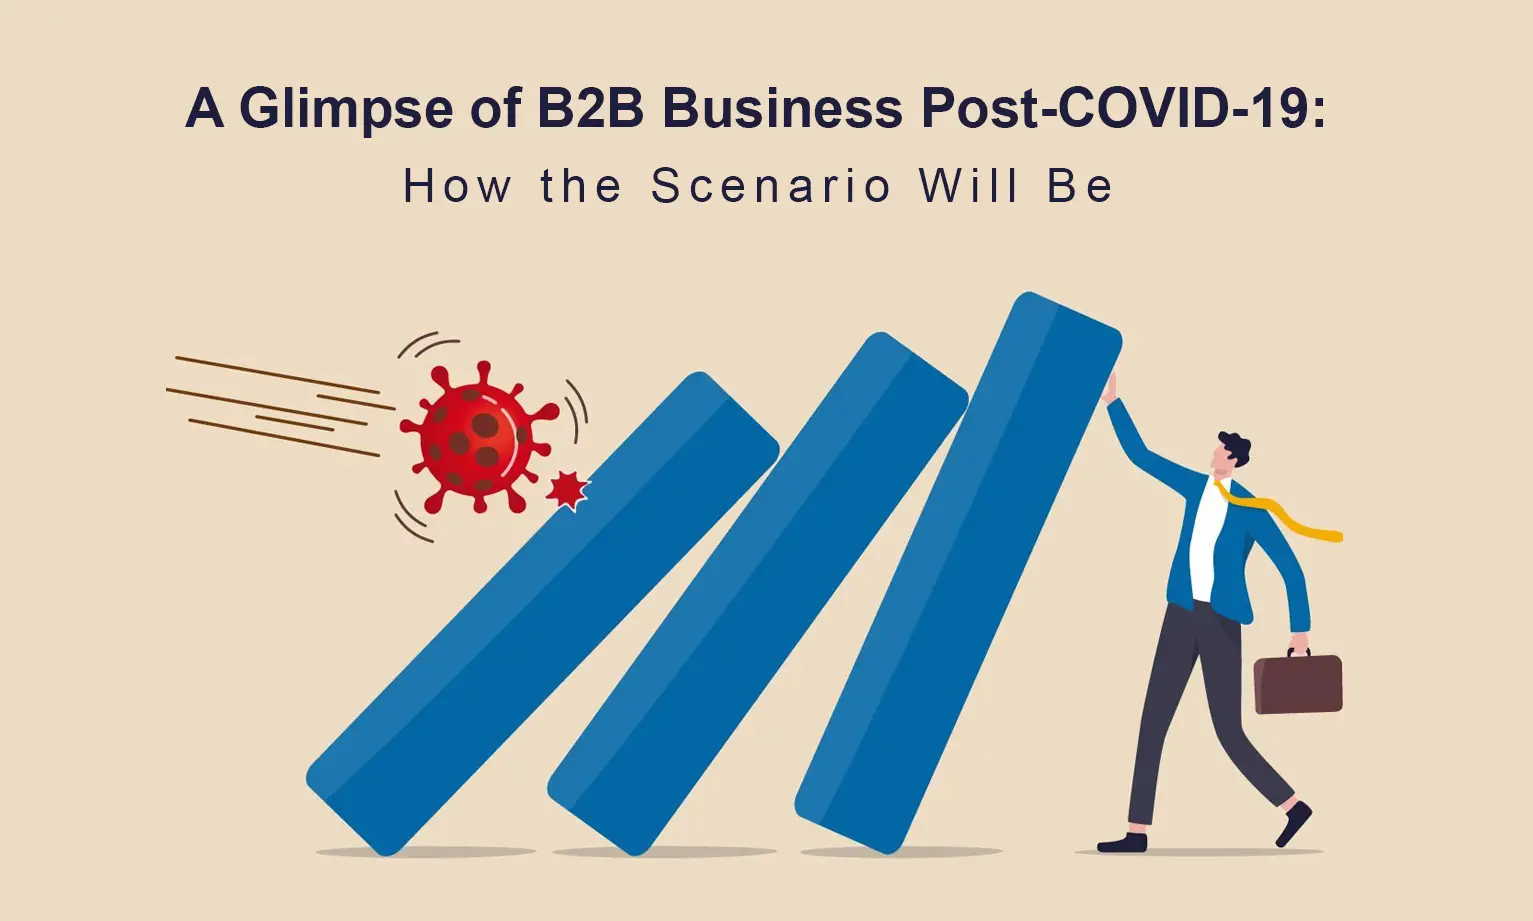 A Glimpse of B2B Business Post-COVID-19: How the Scenario Will Be